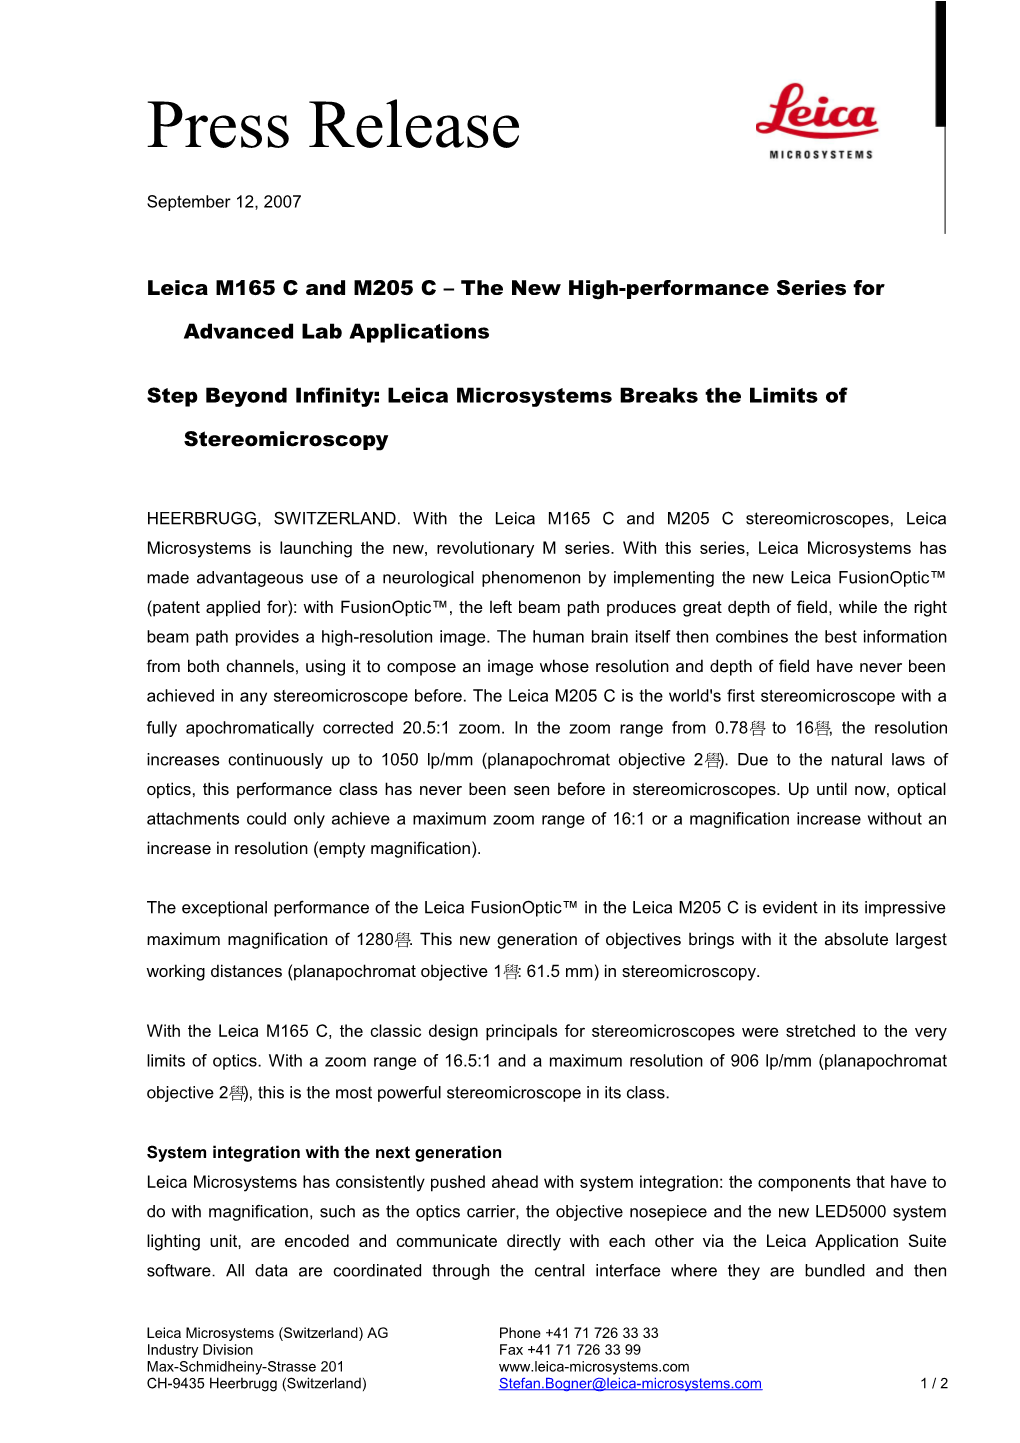 Leica M165 C and M205 C the New High-Performance Series for Advanced Lab Applications